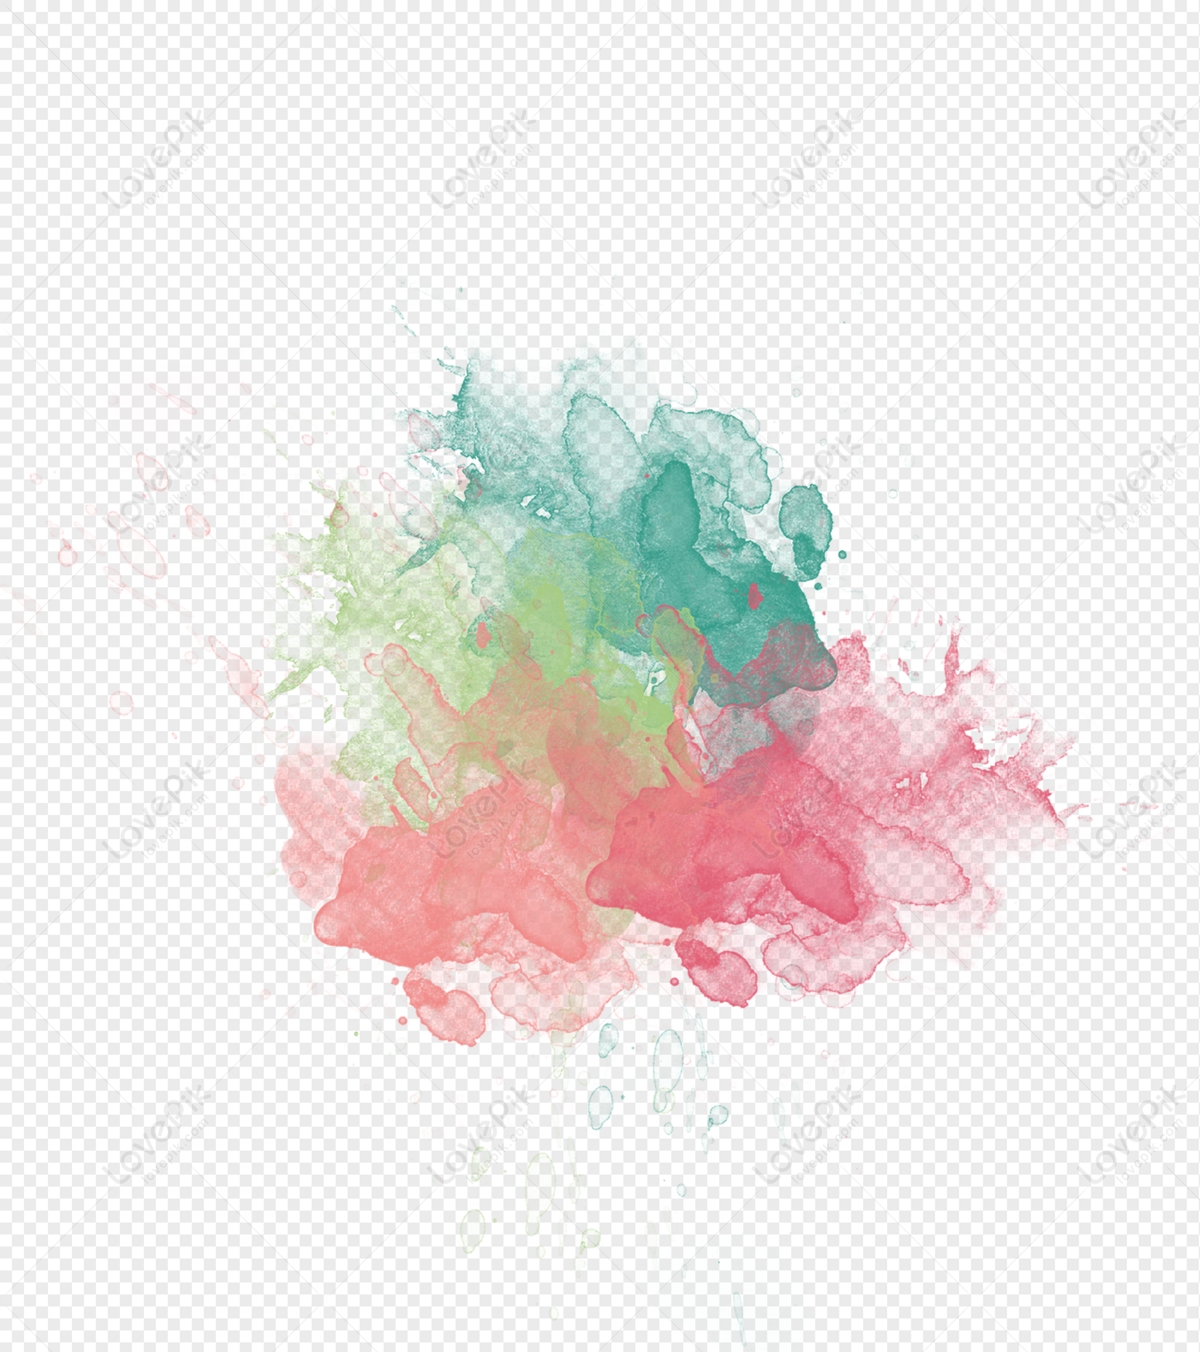 various-color-watercolor-brush-effect-png-transparent-background-and